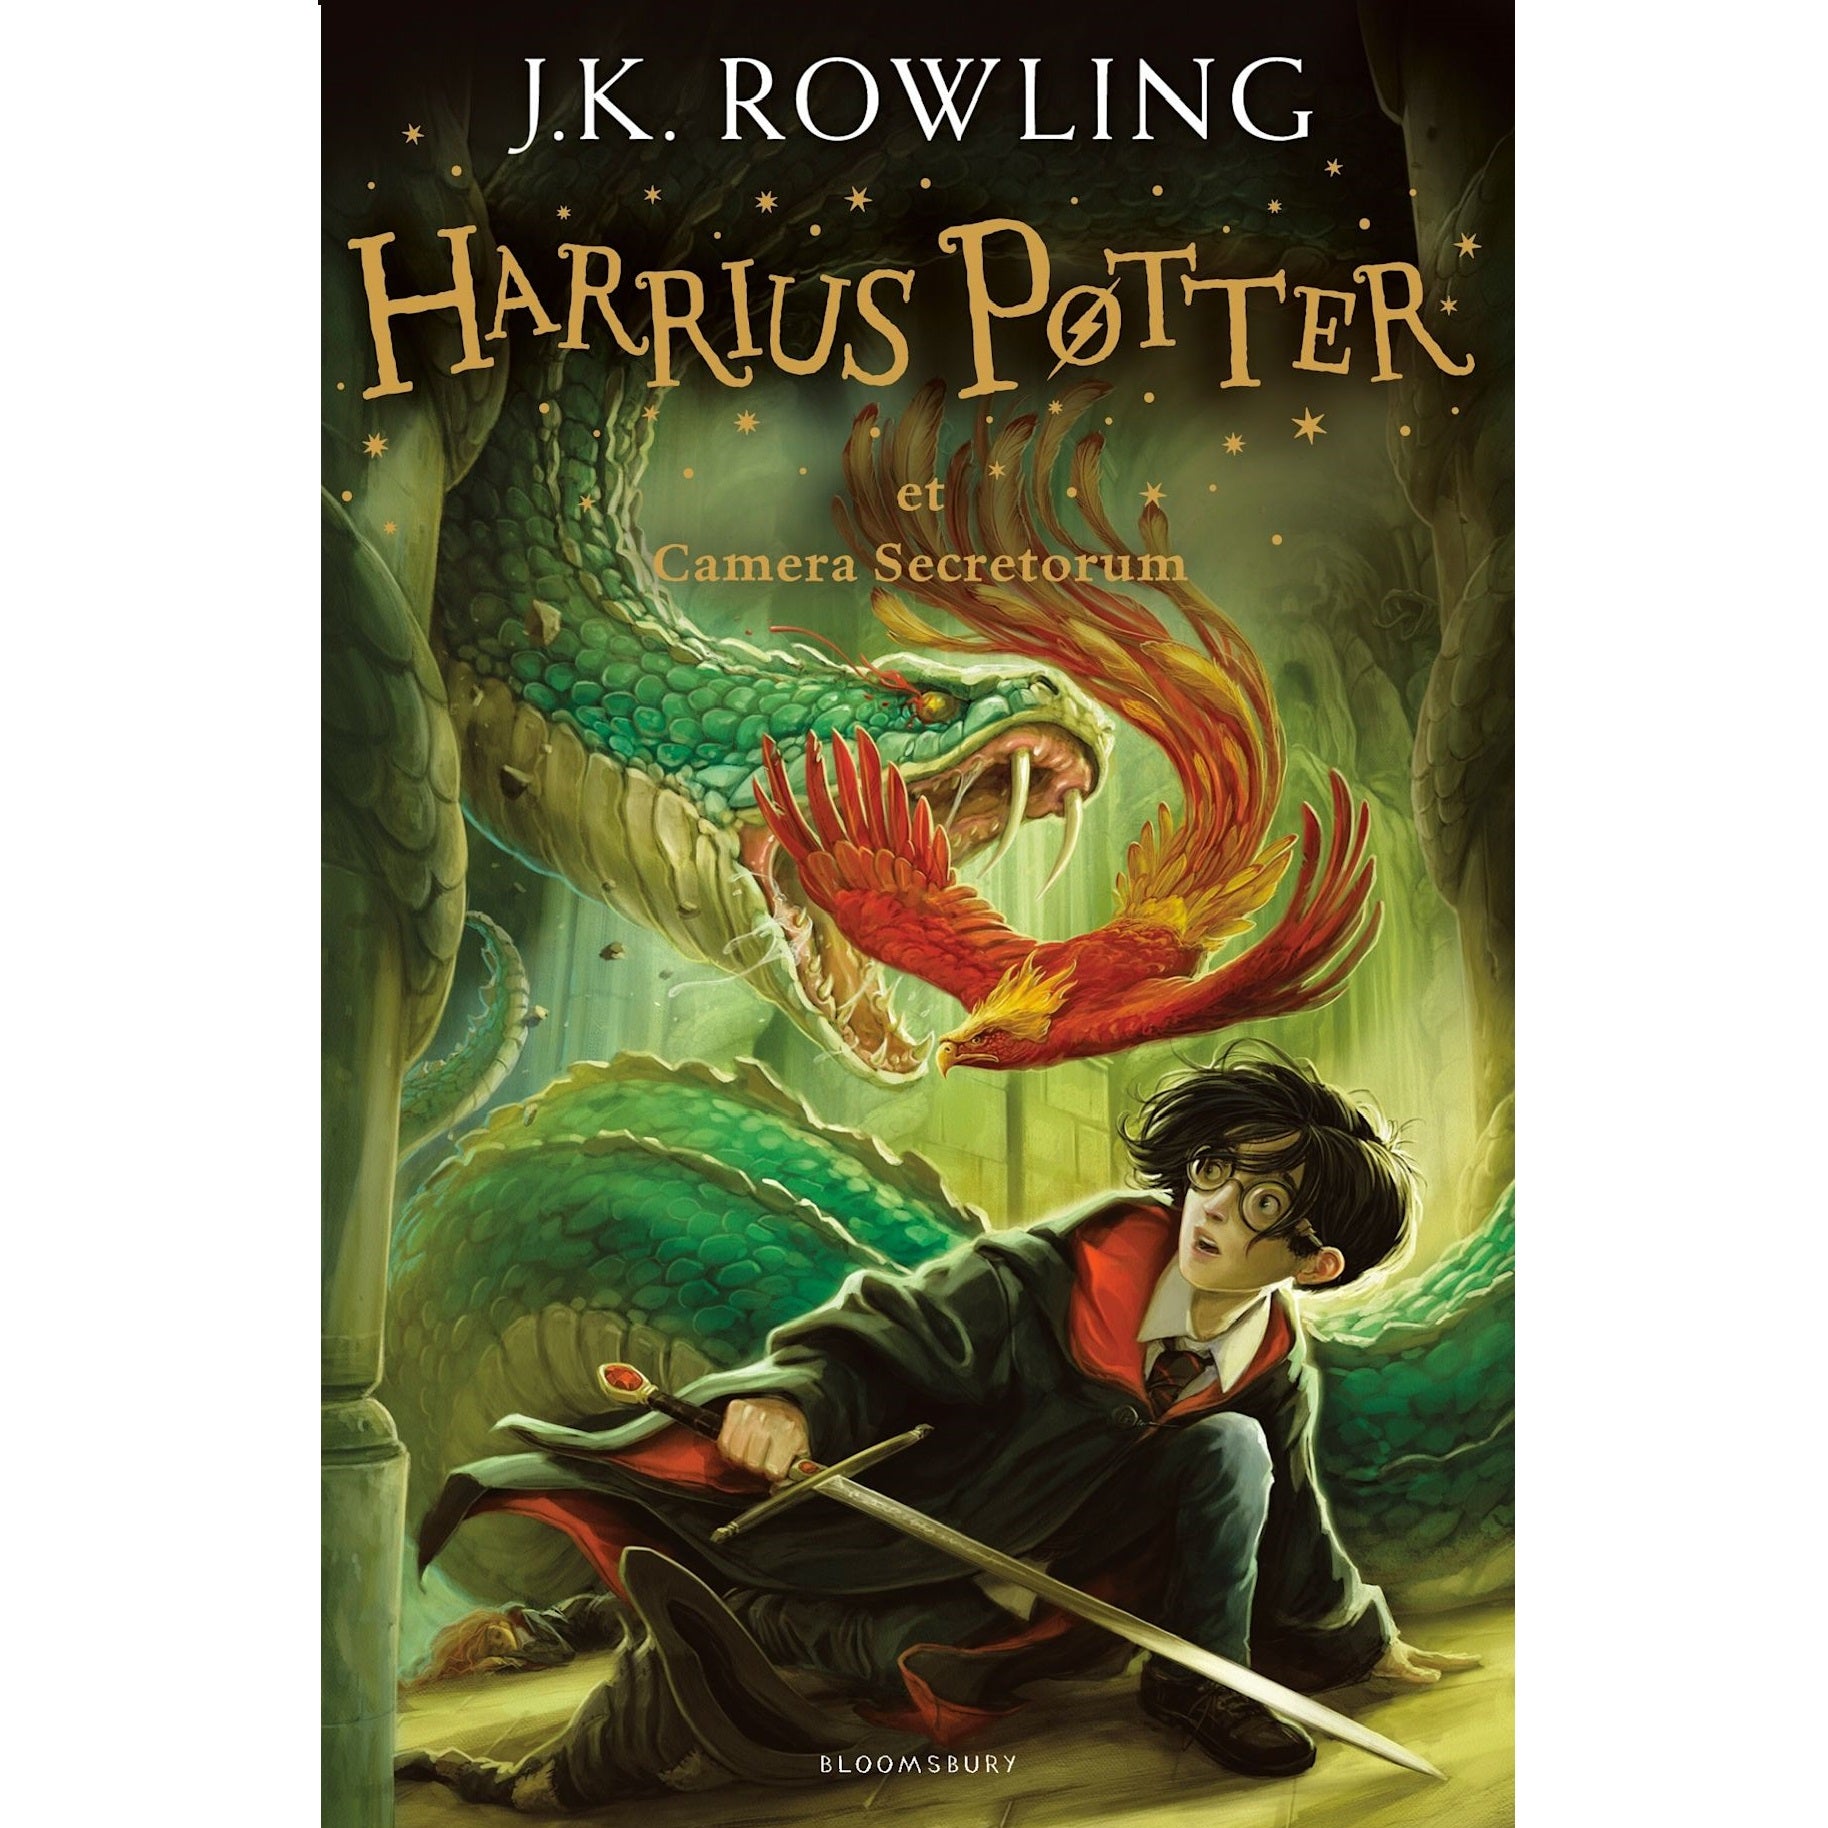 Harry Potter and The Chamber Of Secrets #2 (by J.K. Rowling) J.K. Rowling